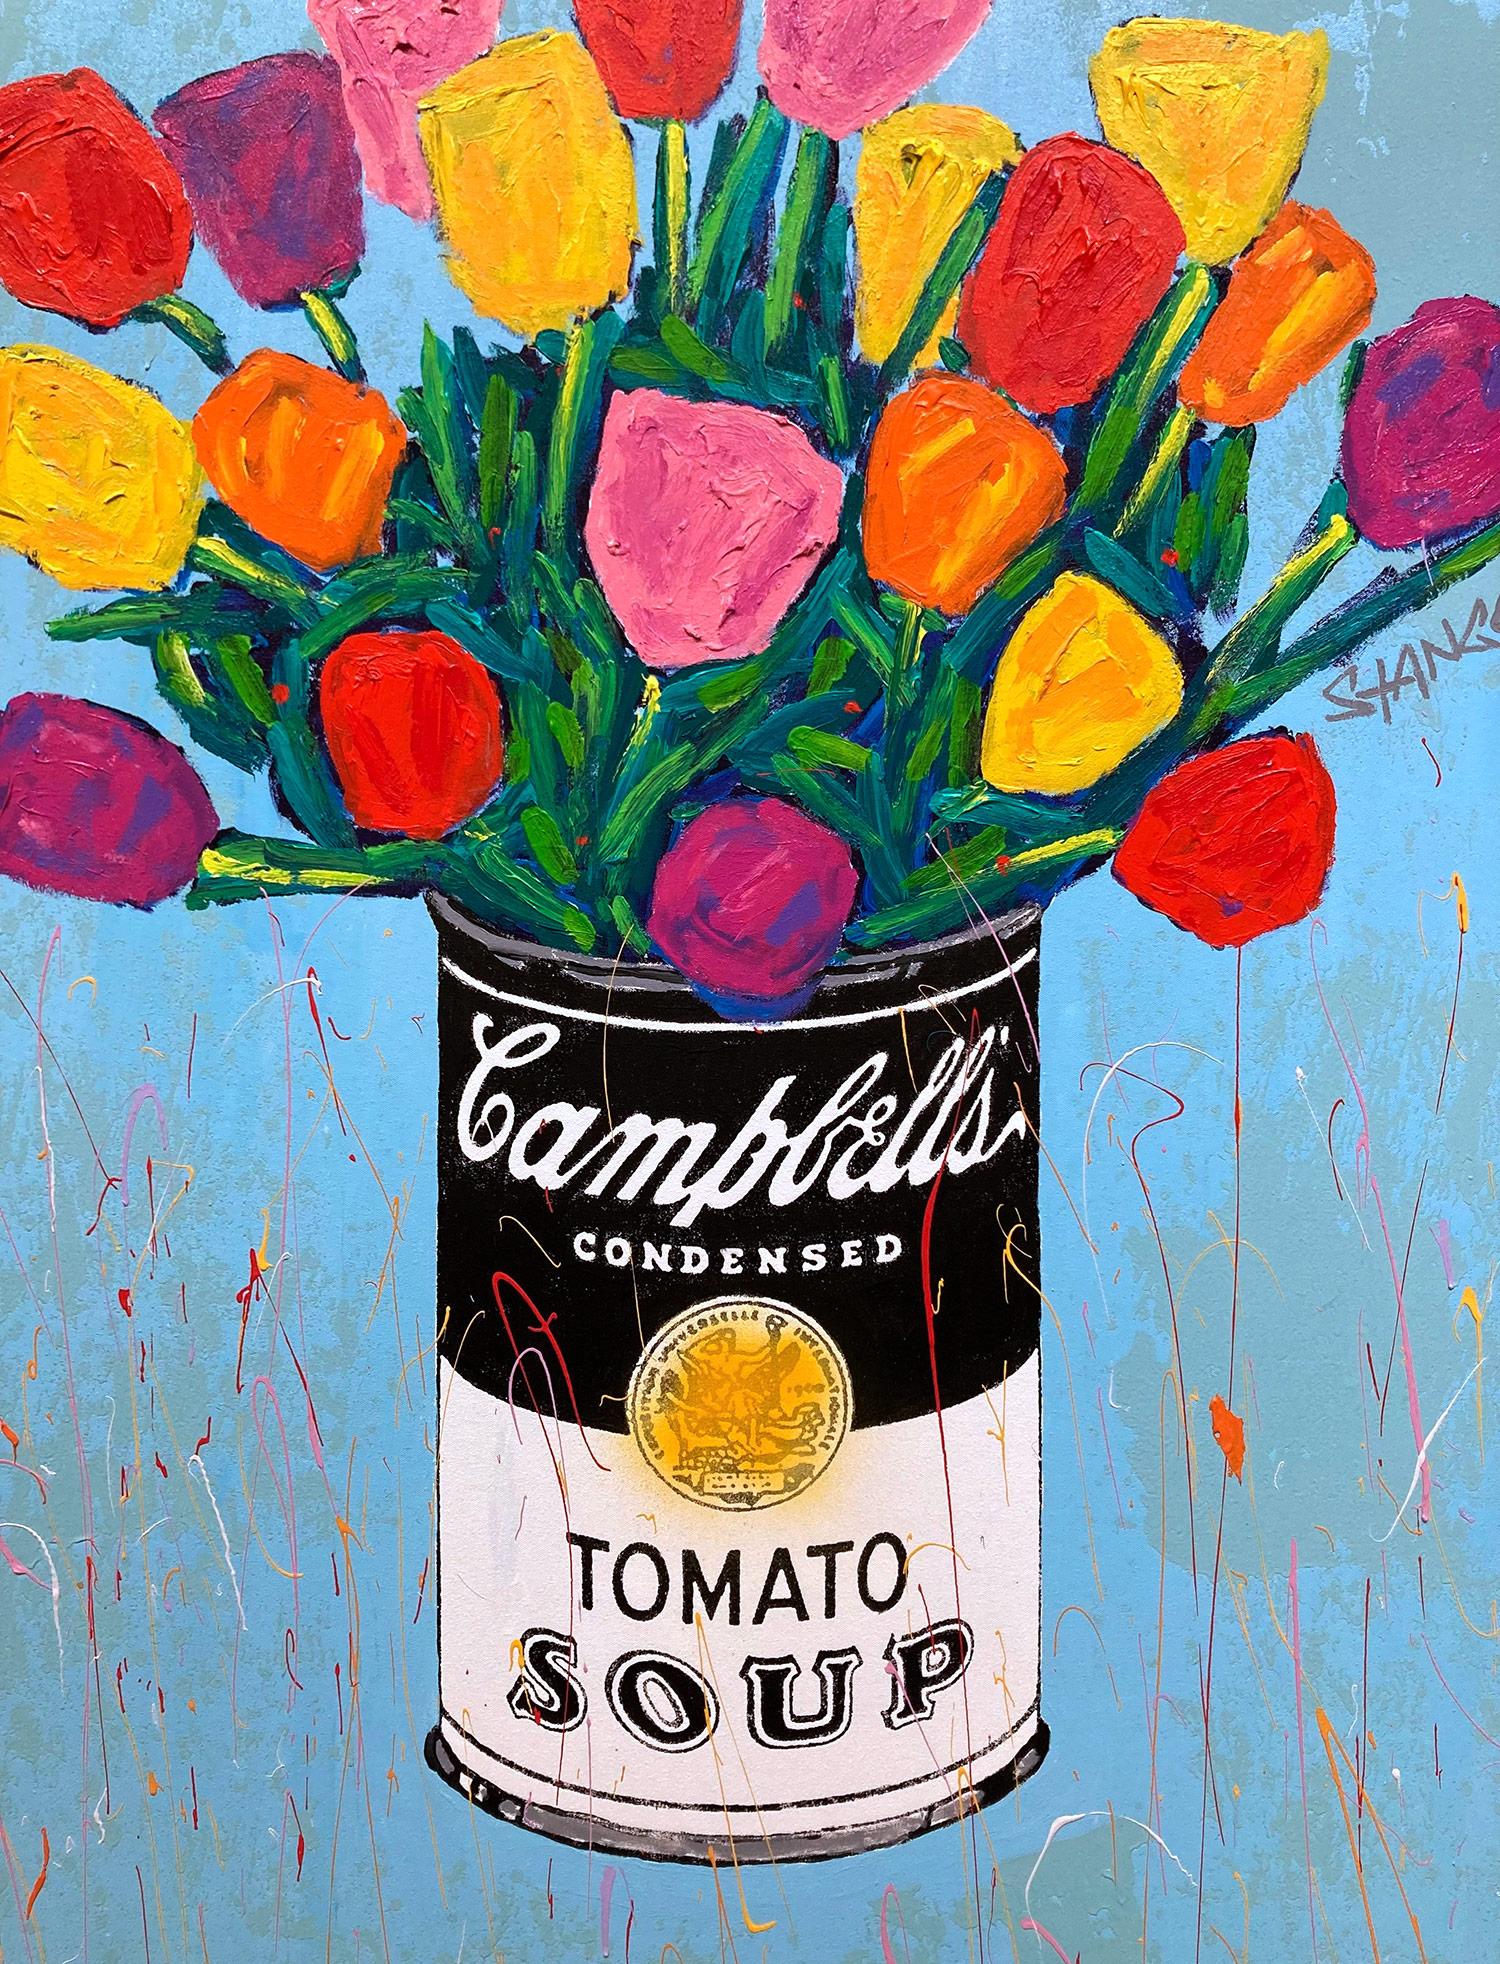 A large pop piece depicting Andy Warhols iconic Campbell's tomato soup holding a colorful bouquet of tulips. Bursting with impasto painting, and quick brushwork we are drawn to the movement, as the artist is able to engage his viewer with